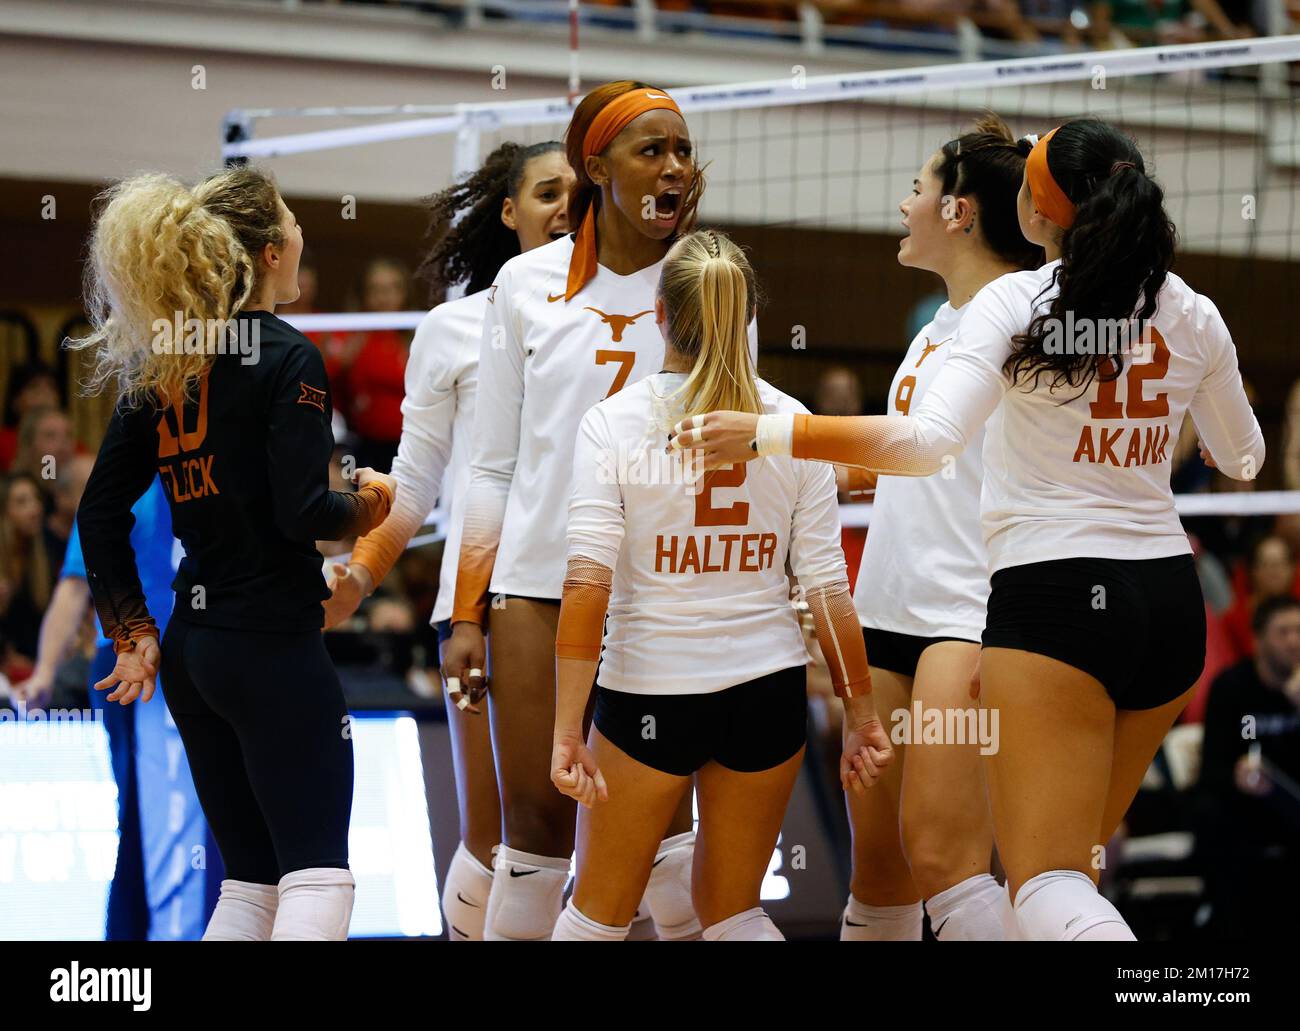 December 10, 2022 The Texas Longhorns celebrate a point during the NCAA Womens Volleyball Tournament regional final between Texas and Ohio State on Dec